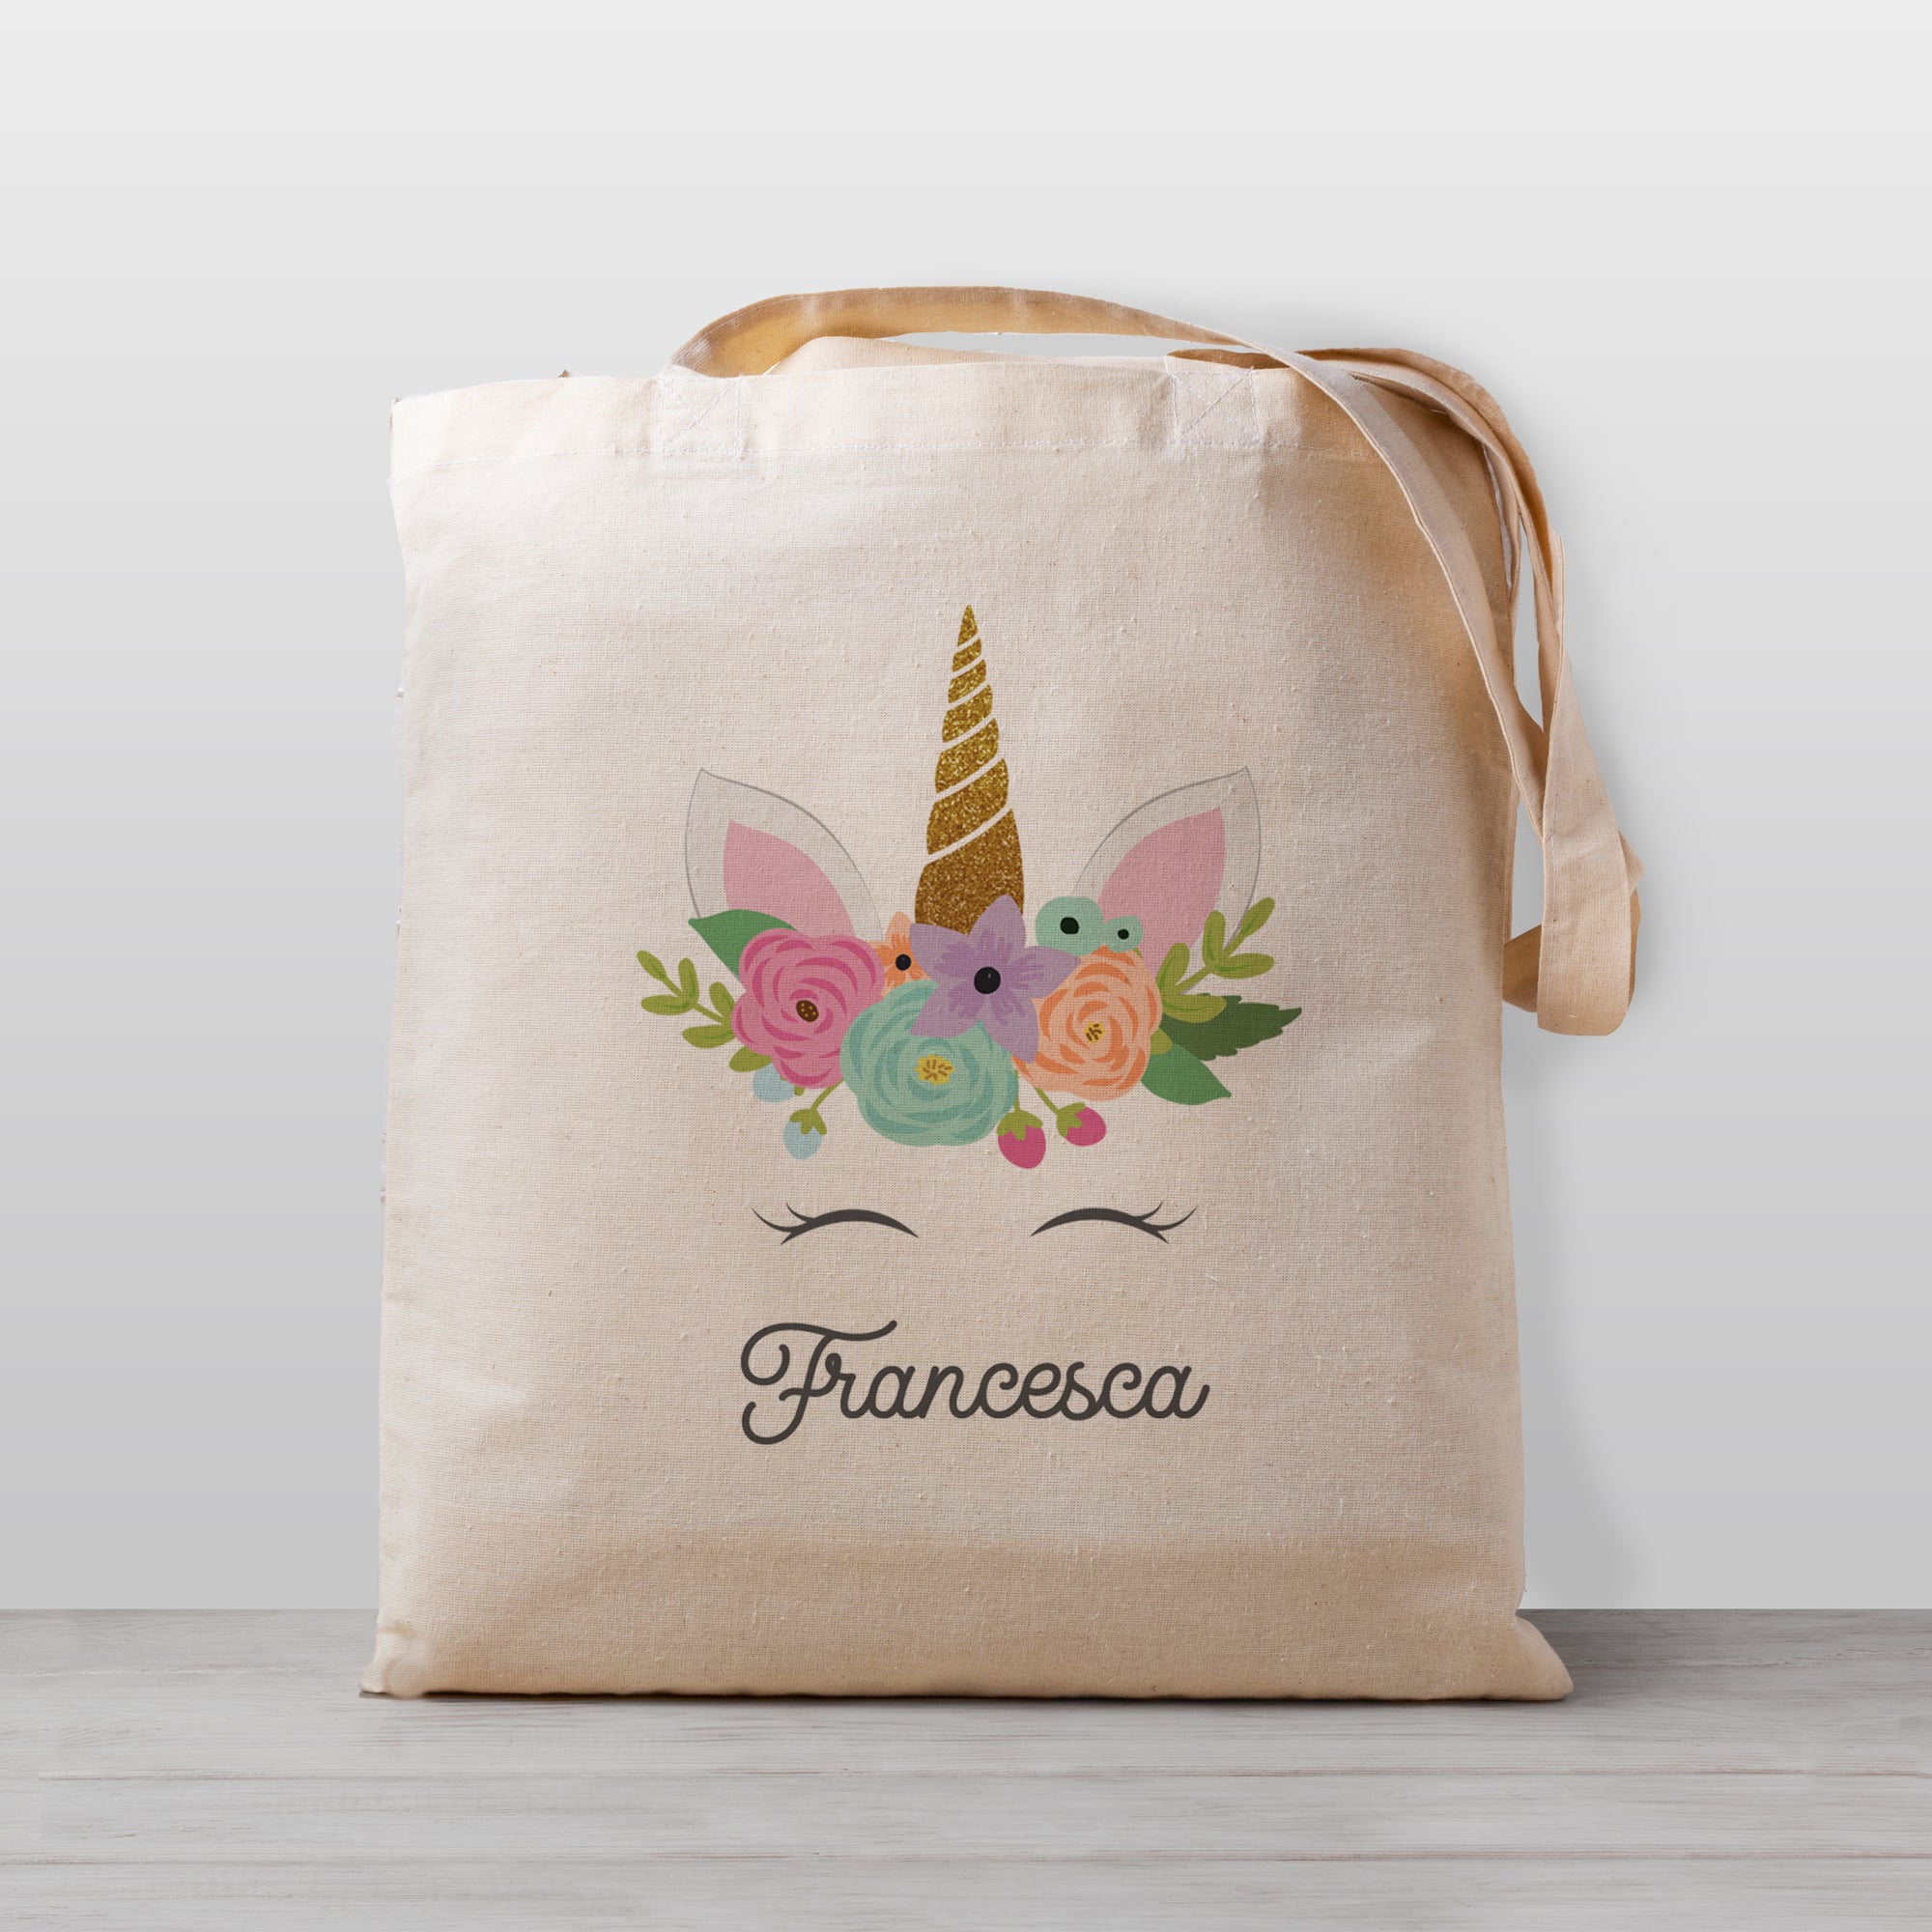 Unicorn Tote Bag, Personalized with flowers, 100% natural cotton canvas